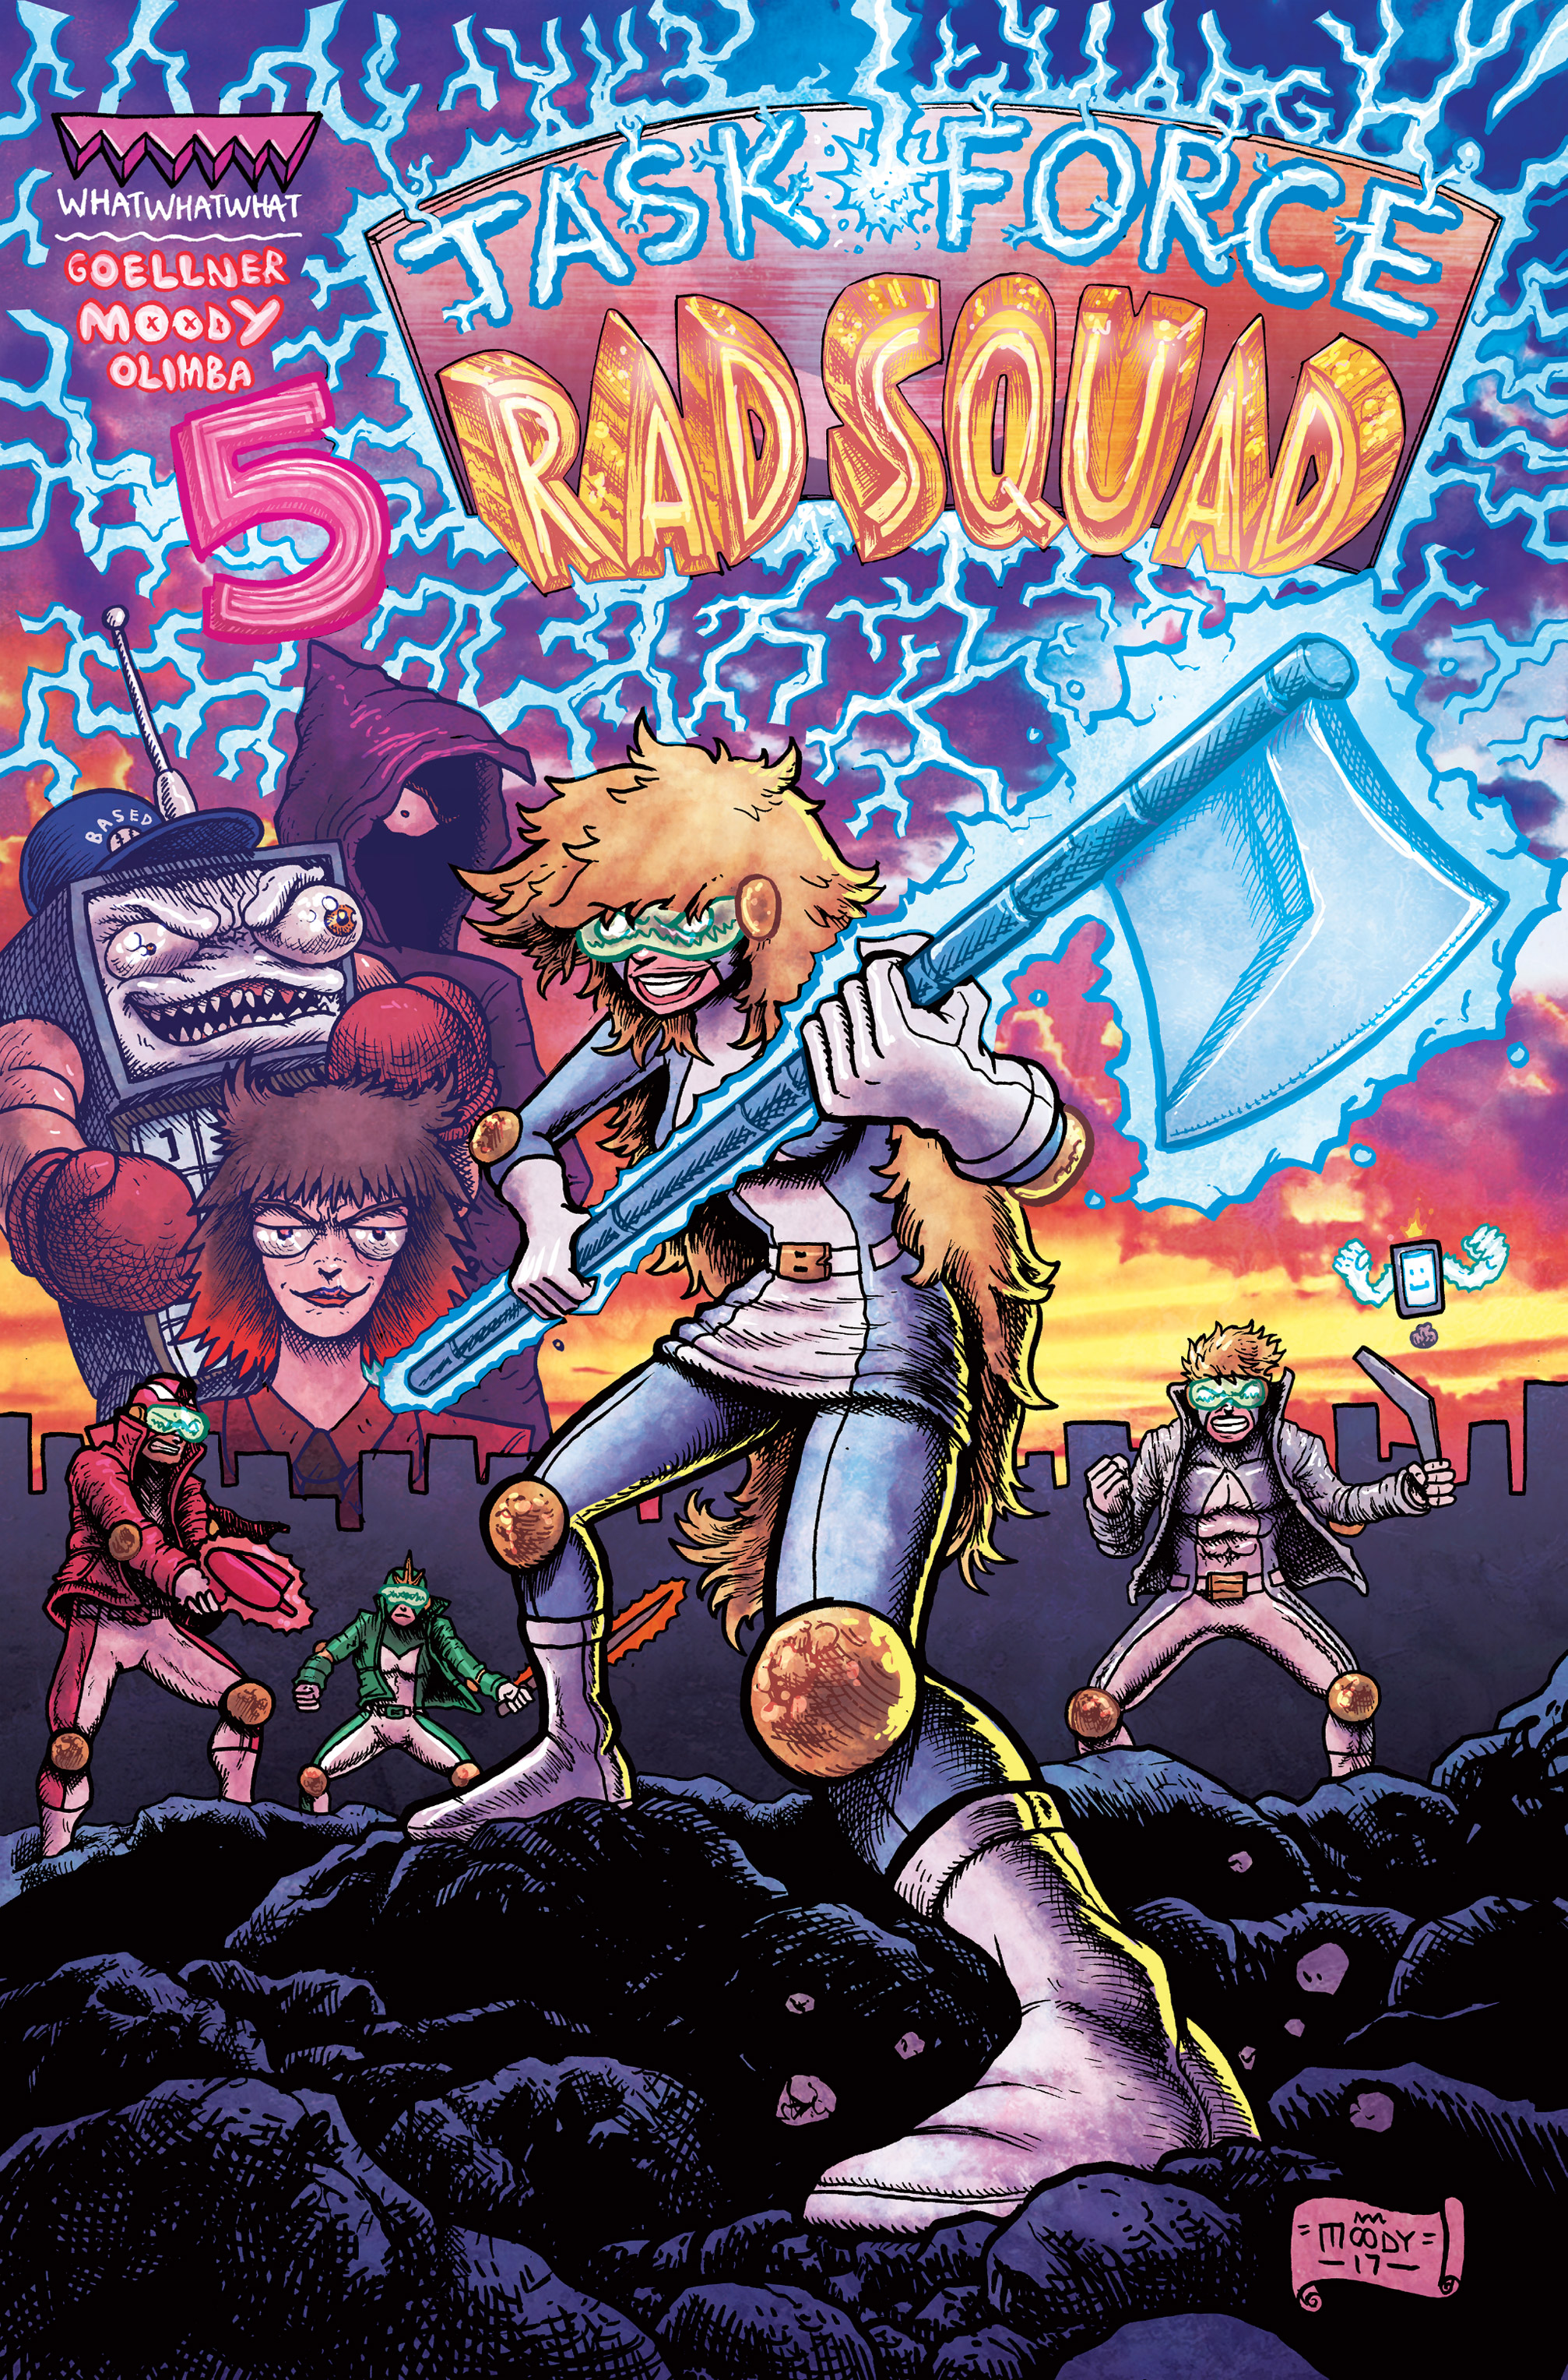 Read online Task Force Rad Squad comic -  Issue #5 - 1